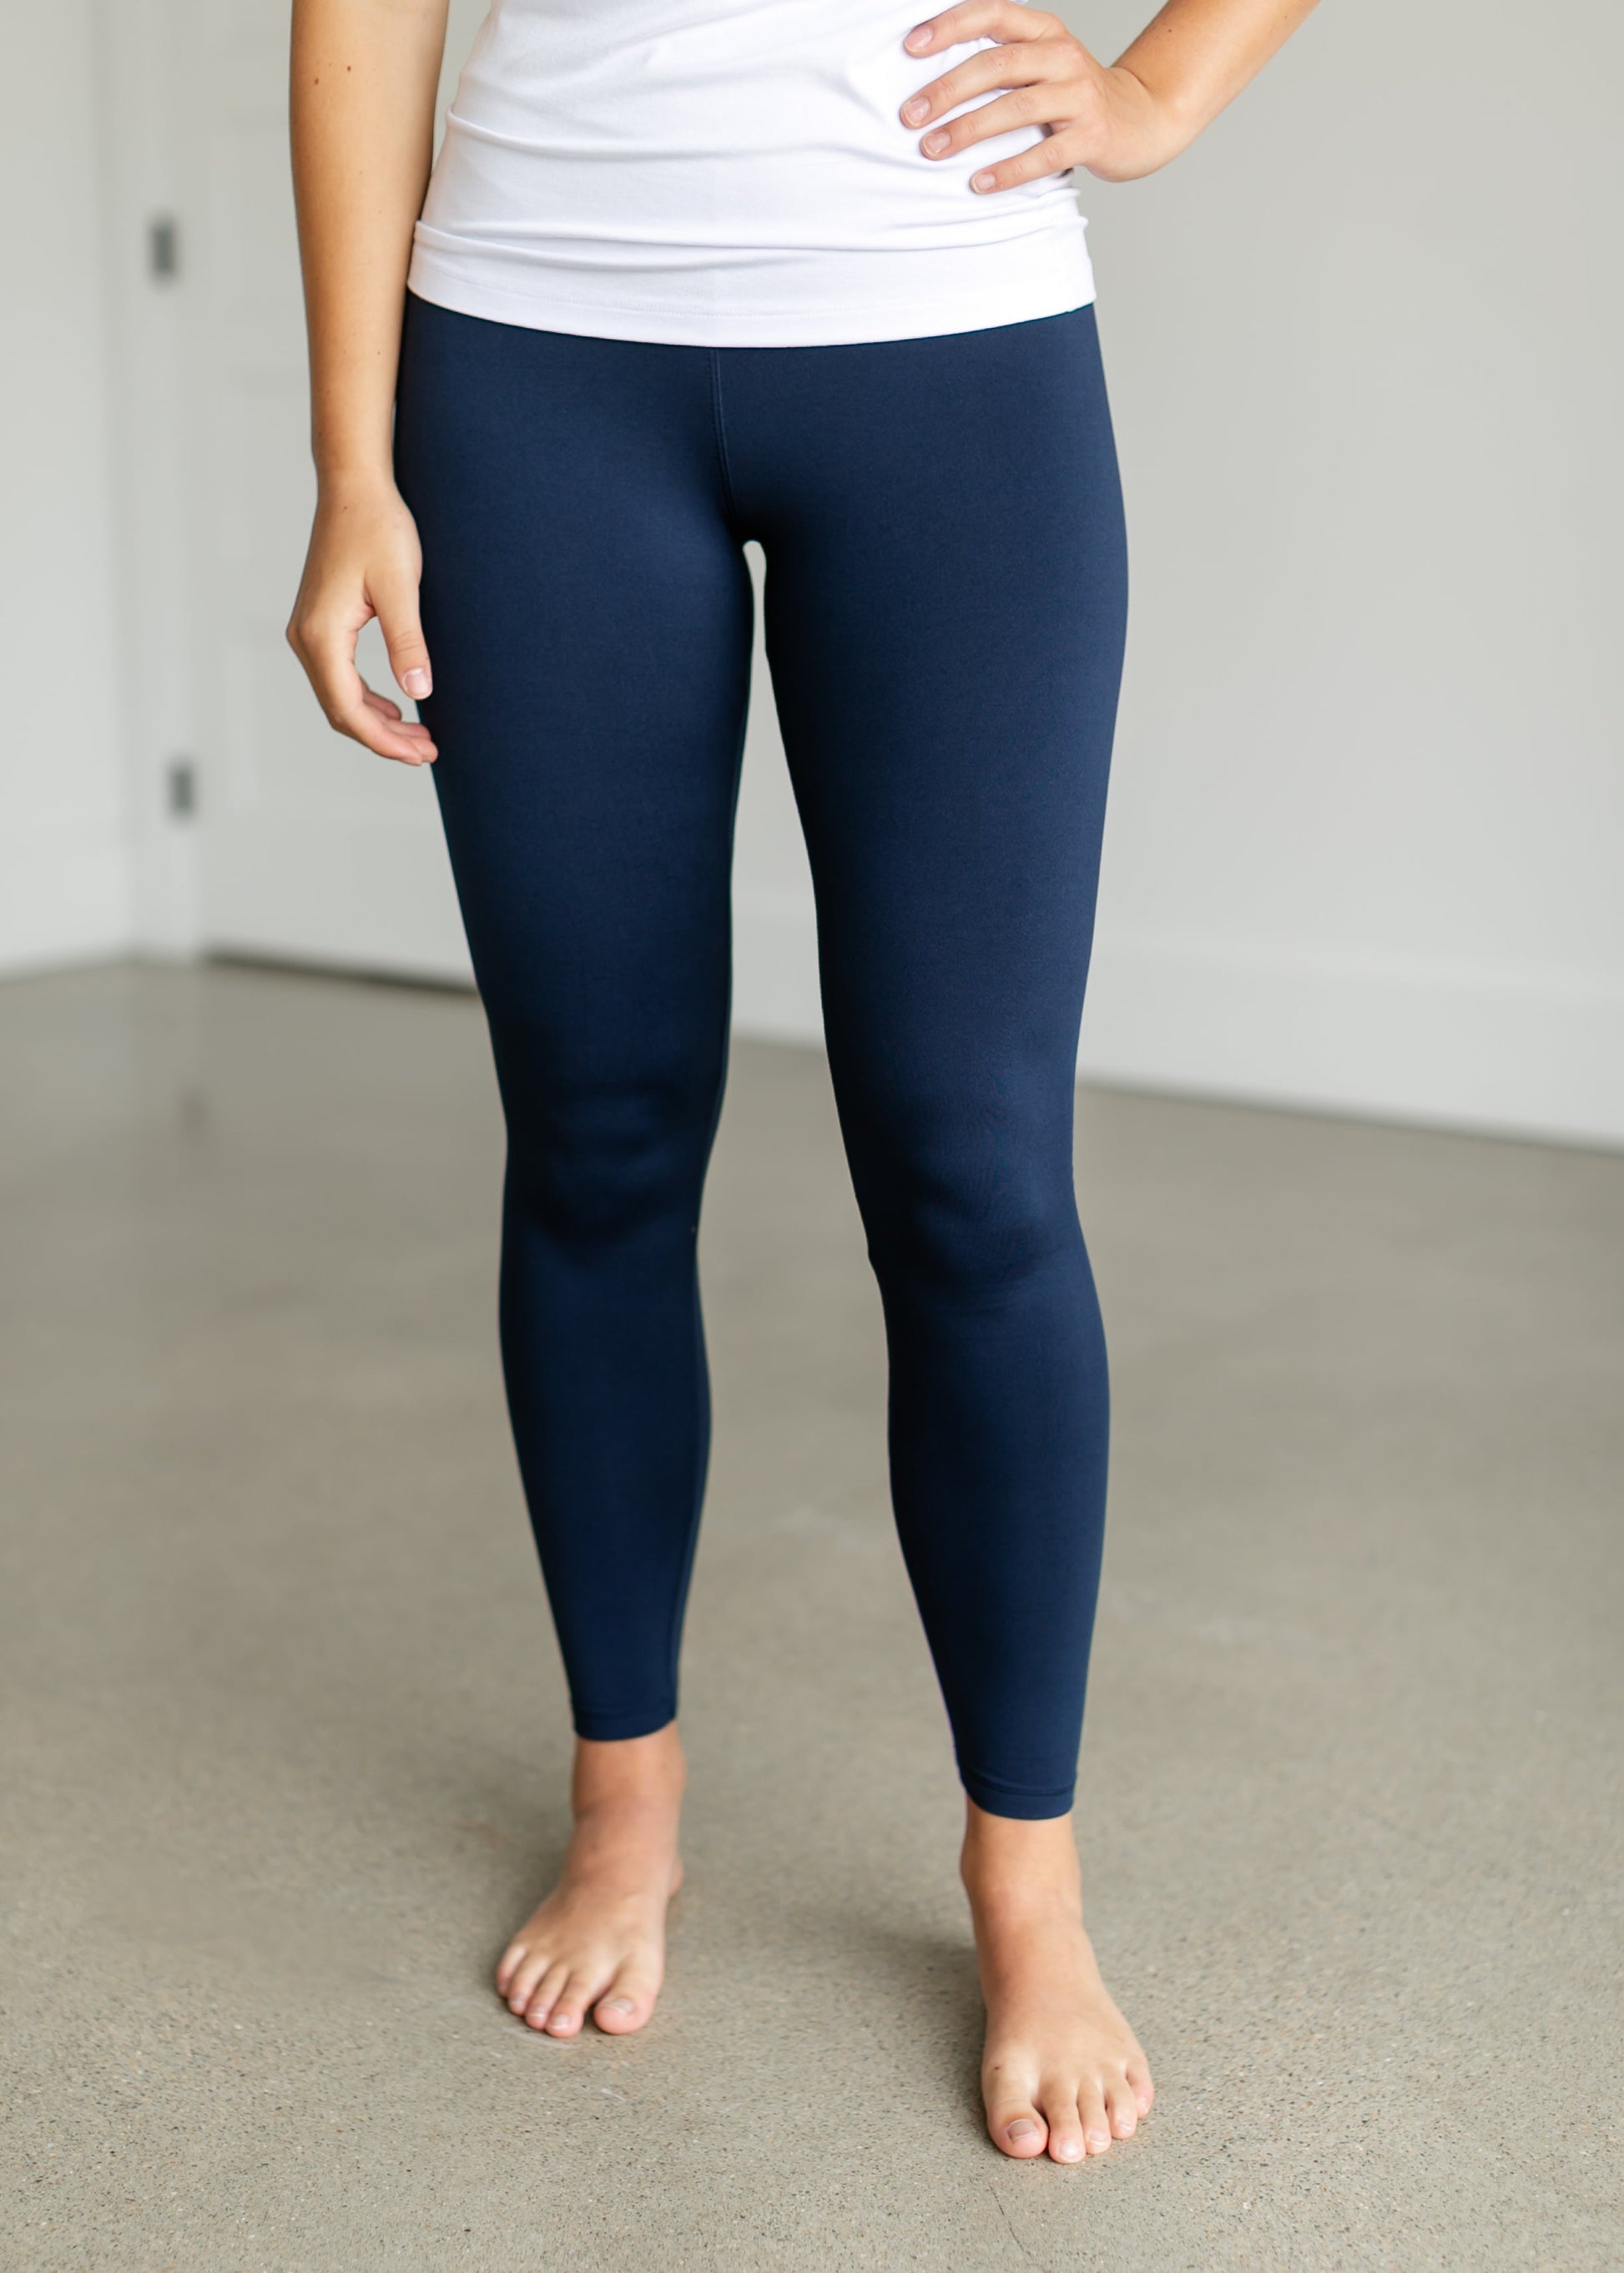 Touched By Nature Womens Organic Cotton Leggings, Navy, X-large : Target